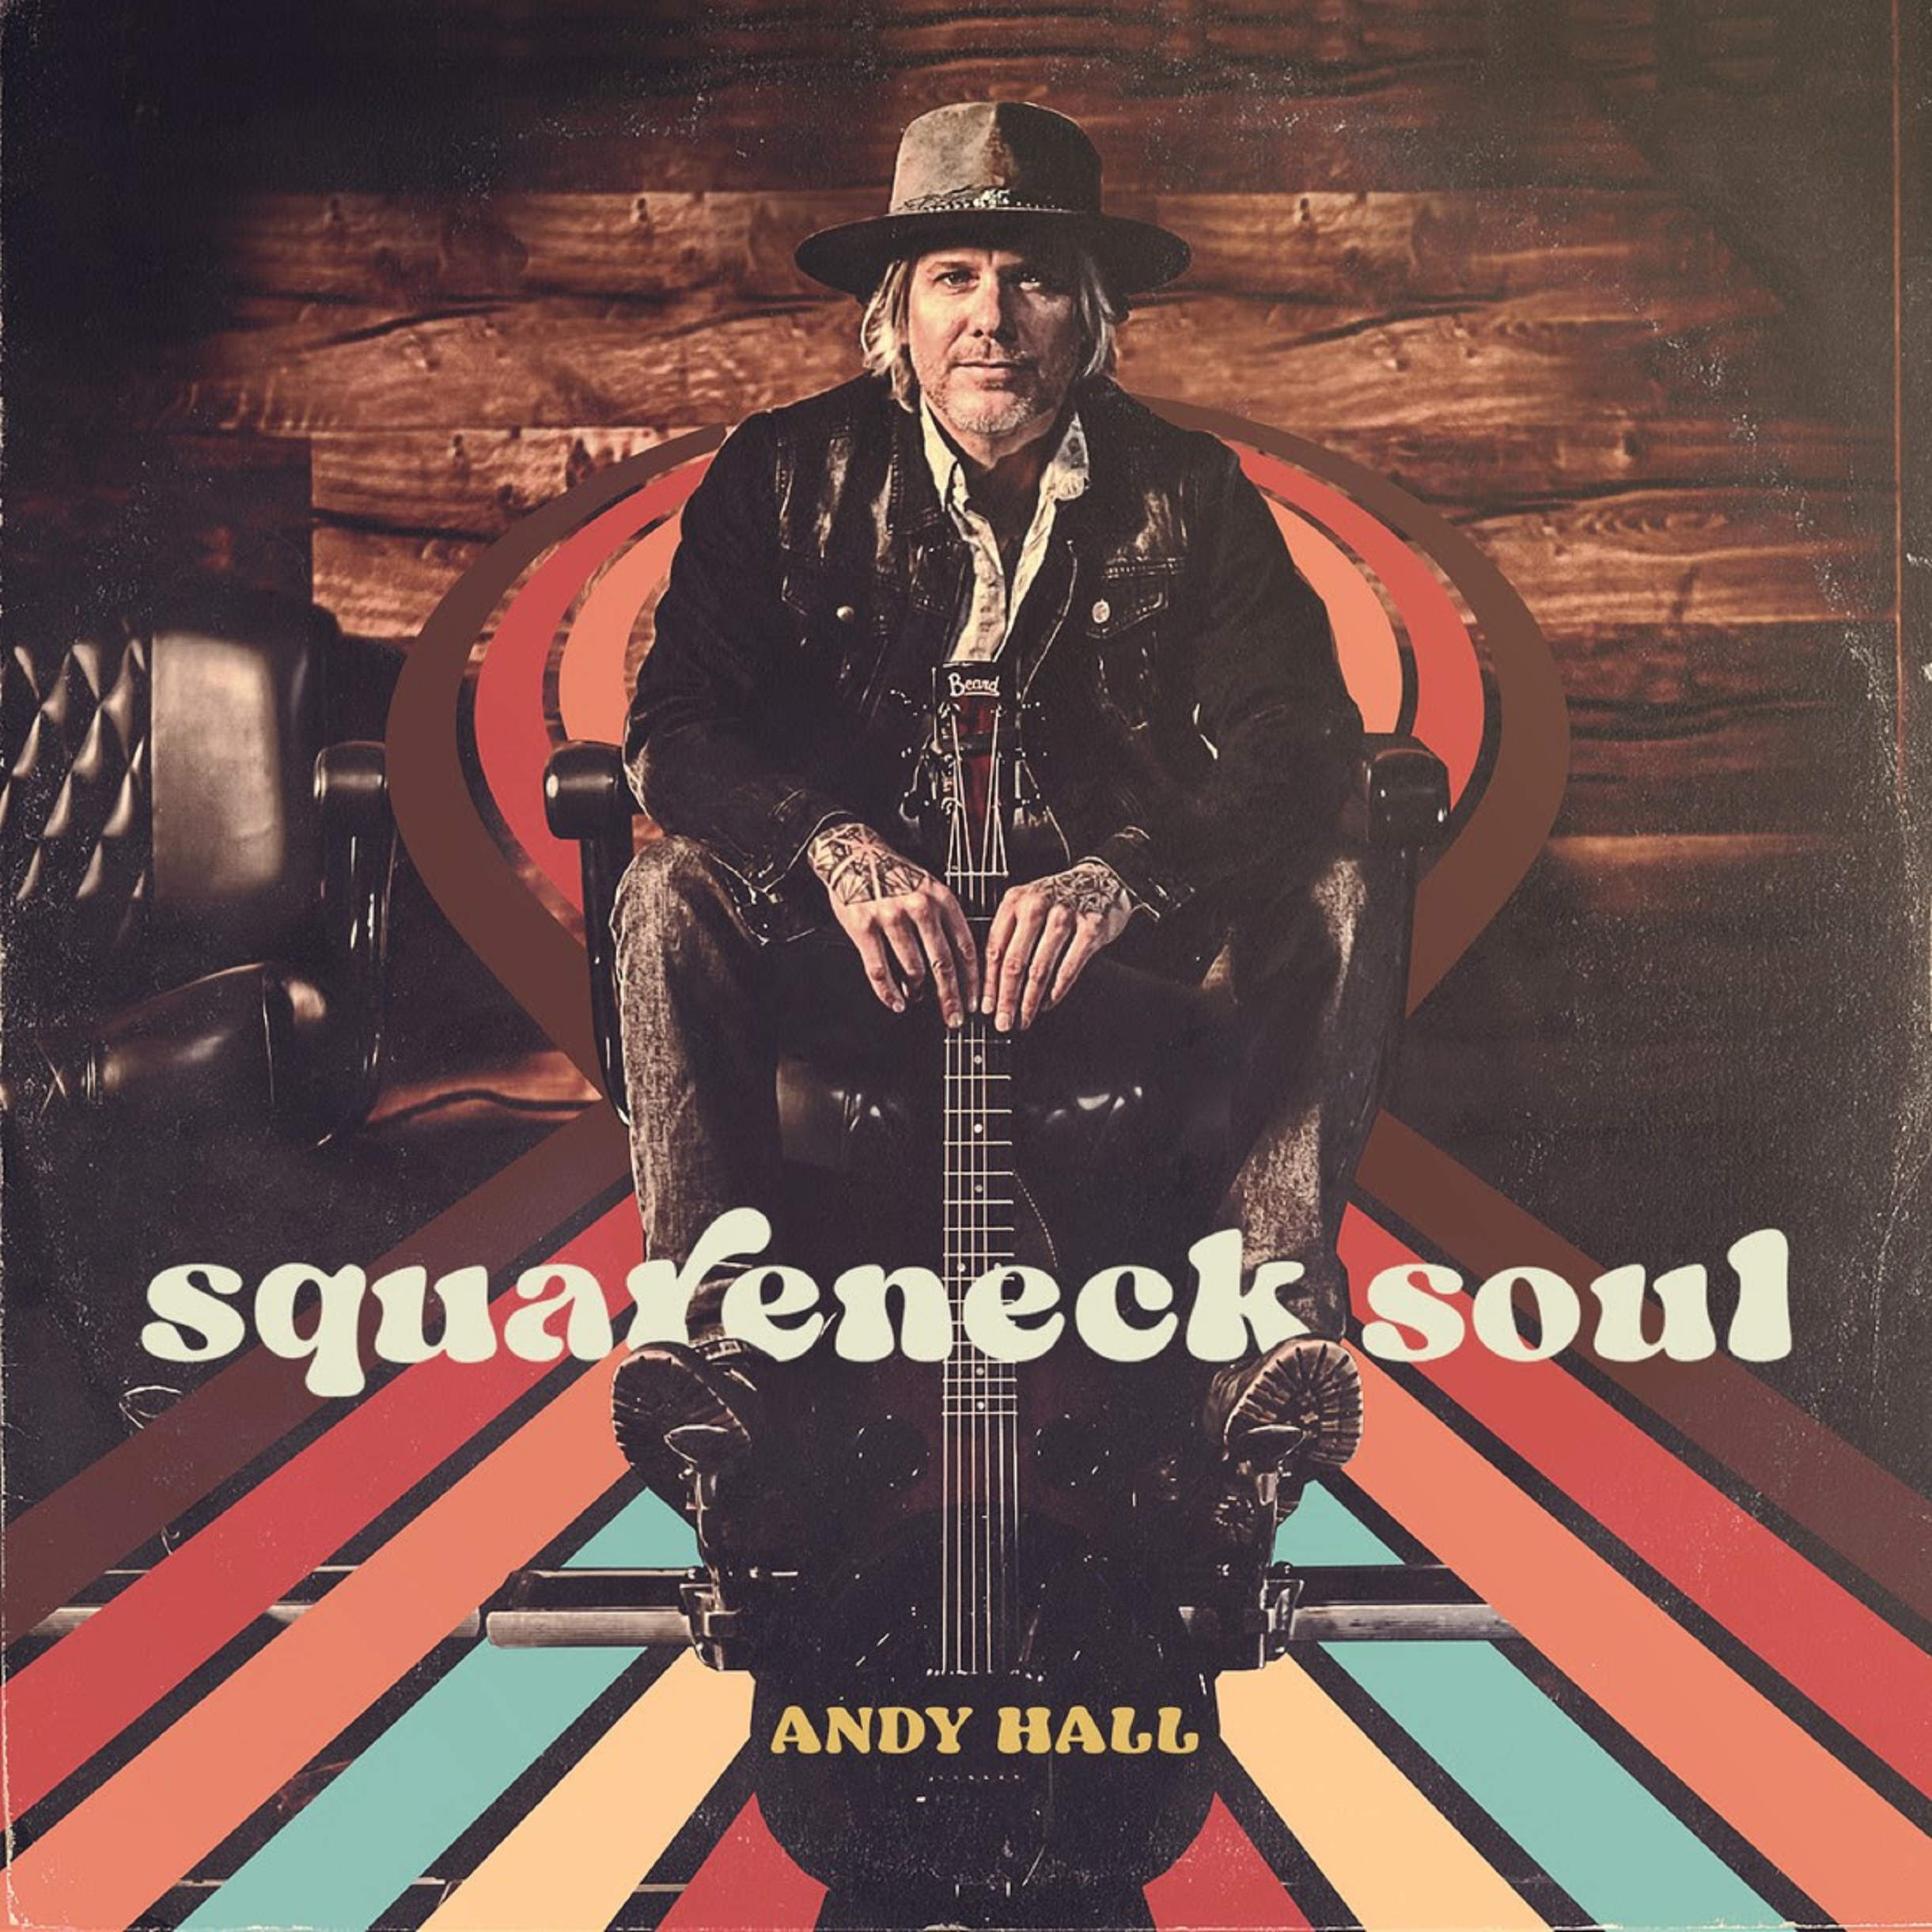 Andy Hall of The Infamous Stringdusters Announces New Solo Album ‘Squareneck Soul’ & Shares Lead Single